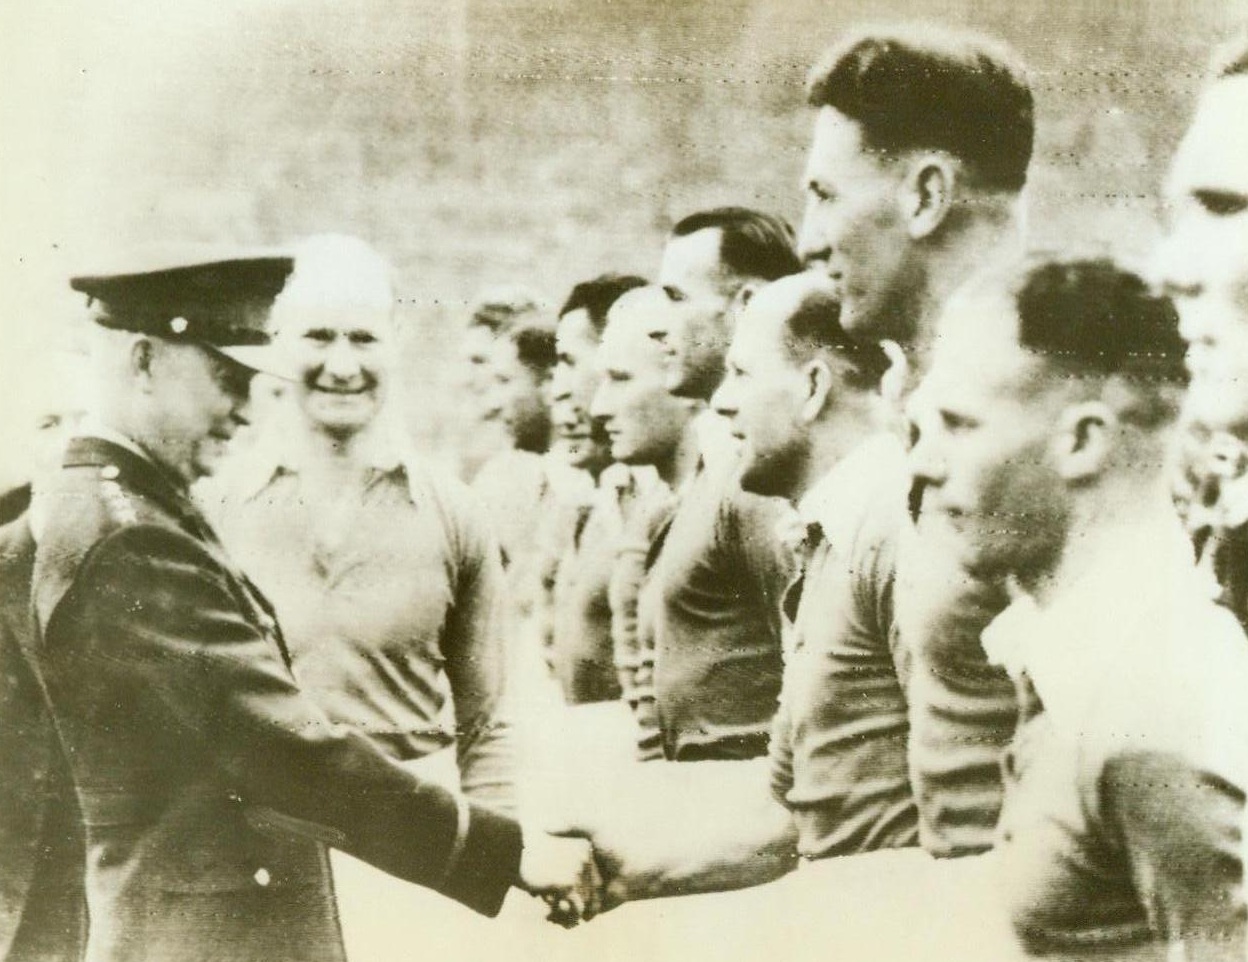 Ike” Calls Time-Out, 4/15/1944. Wembley, England—Gen. Dwight D. Eisenhower shakes hands with members of the Charlton team, winners in the Southern Cup Football final against Chelsea at Wembley Stadium. Gen. Eisenhower came as an unexpected guest to witness his first soccer game and the record wartime crowd of 85,000 gave him a thunderous ovation 4/15/44 (ACME Radiophoto);